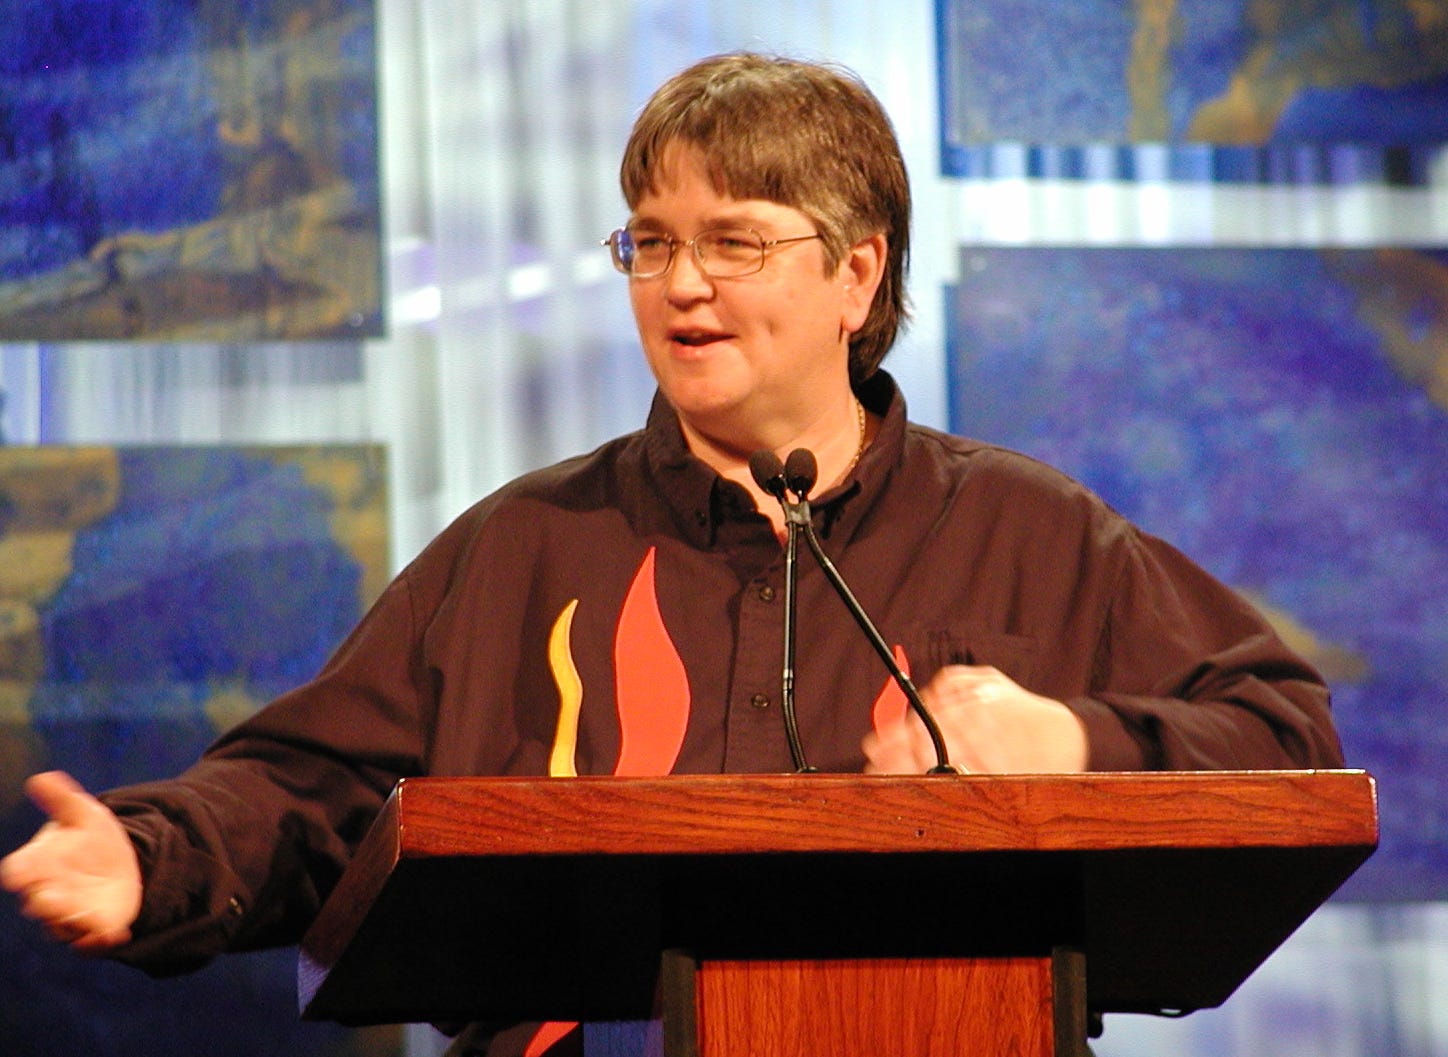 A woman with short brown hair and glasses wearing a shirt with flames on it standing at a podium